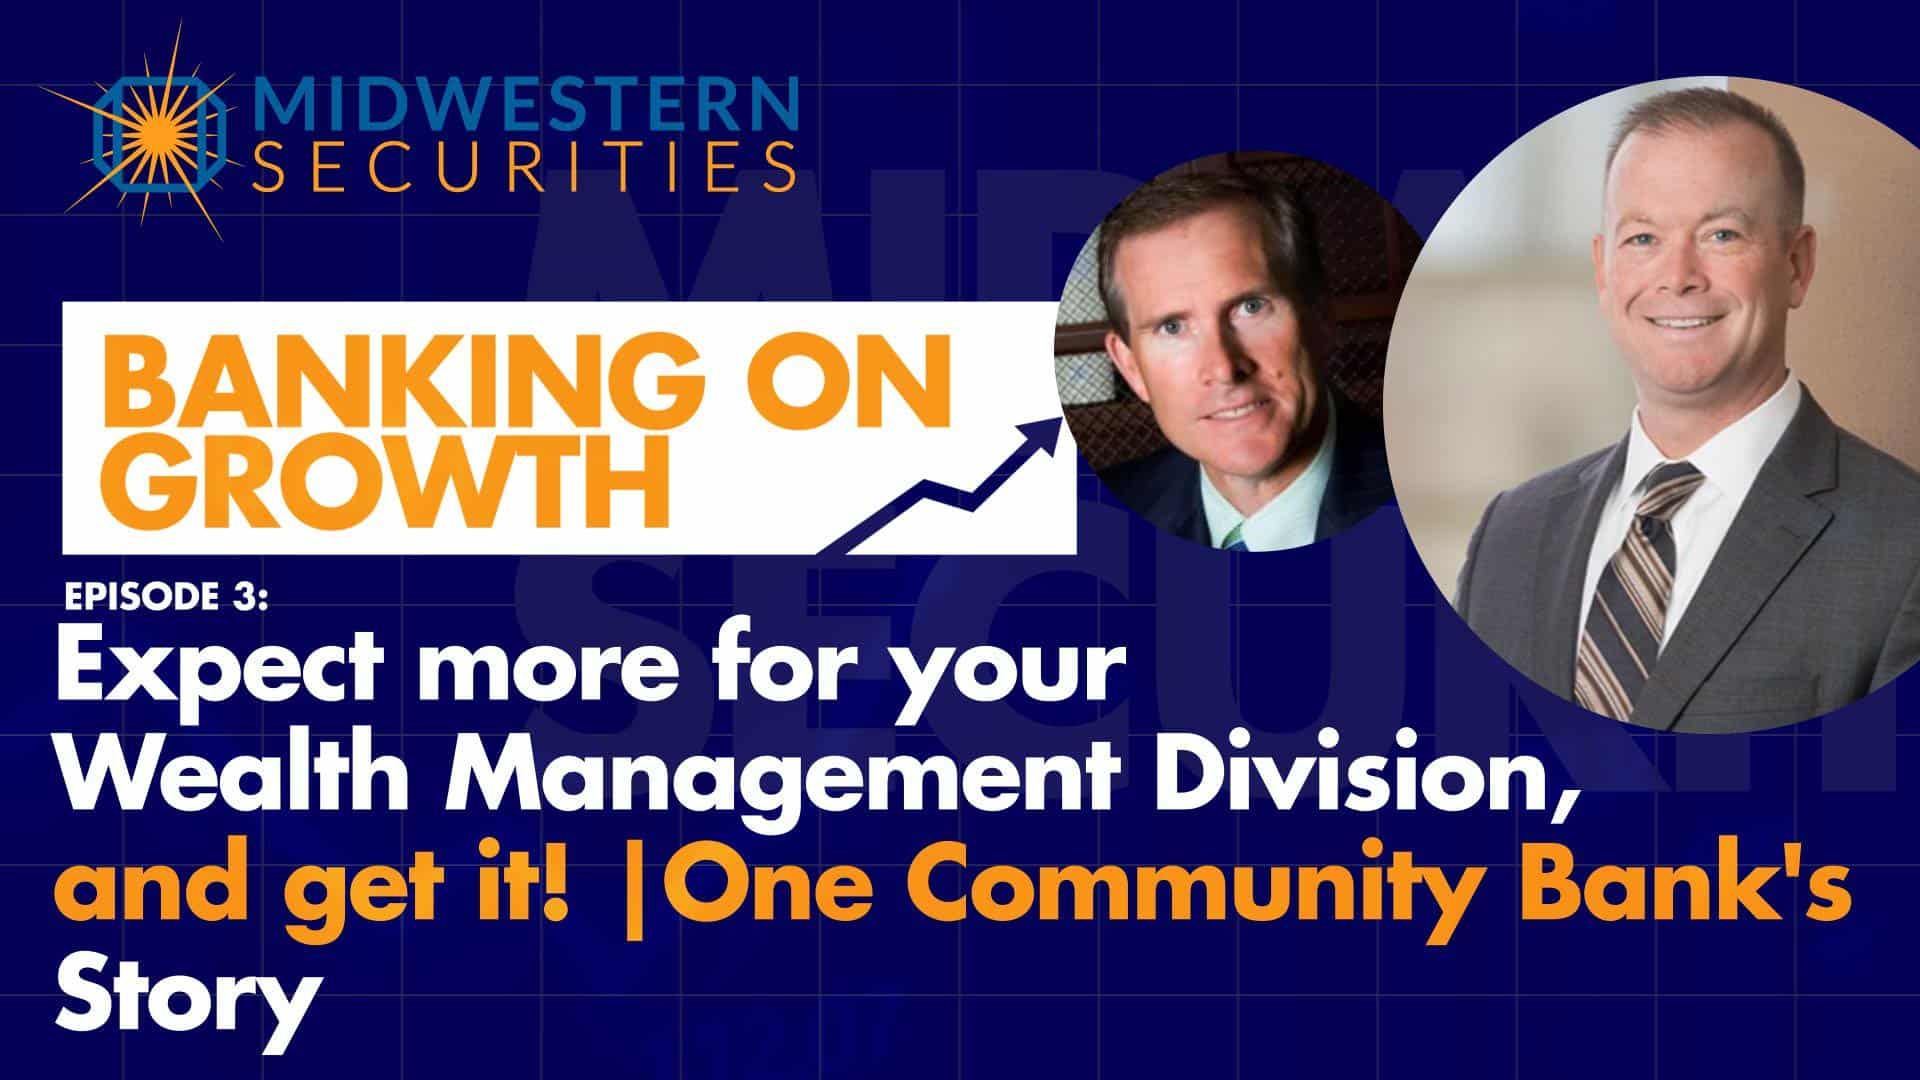 Expect more for your Wealth Management Division, and get it! – One Community Bank’s Story